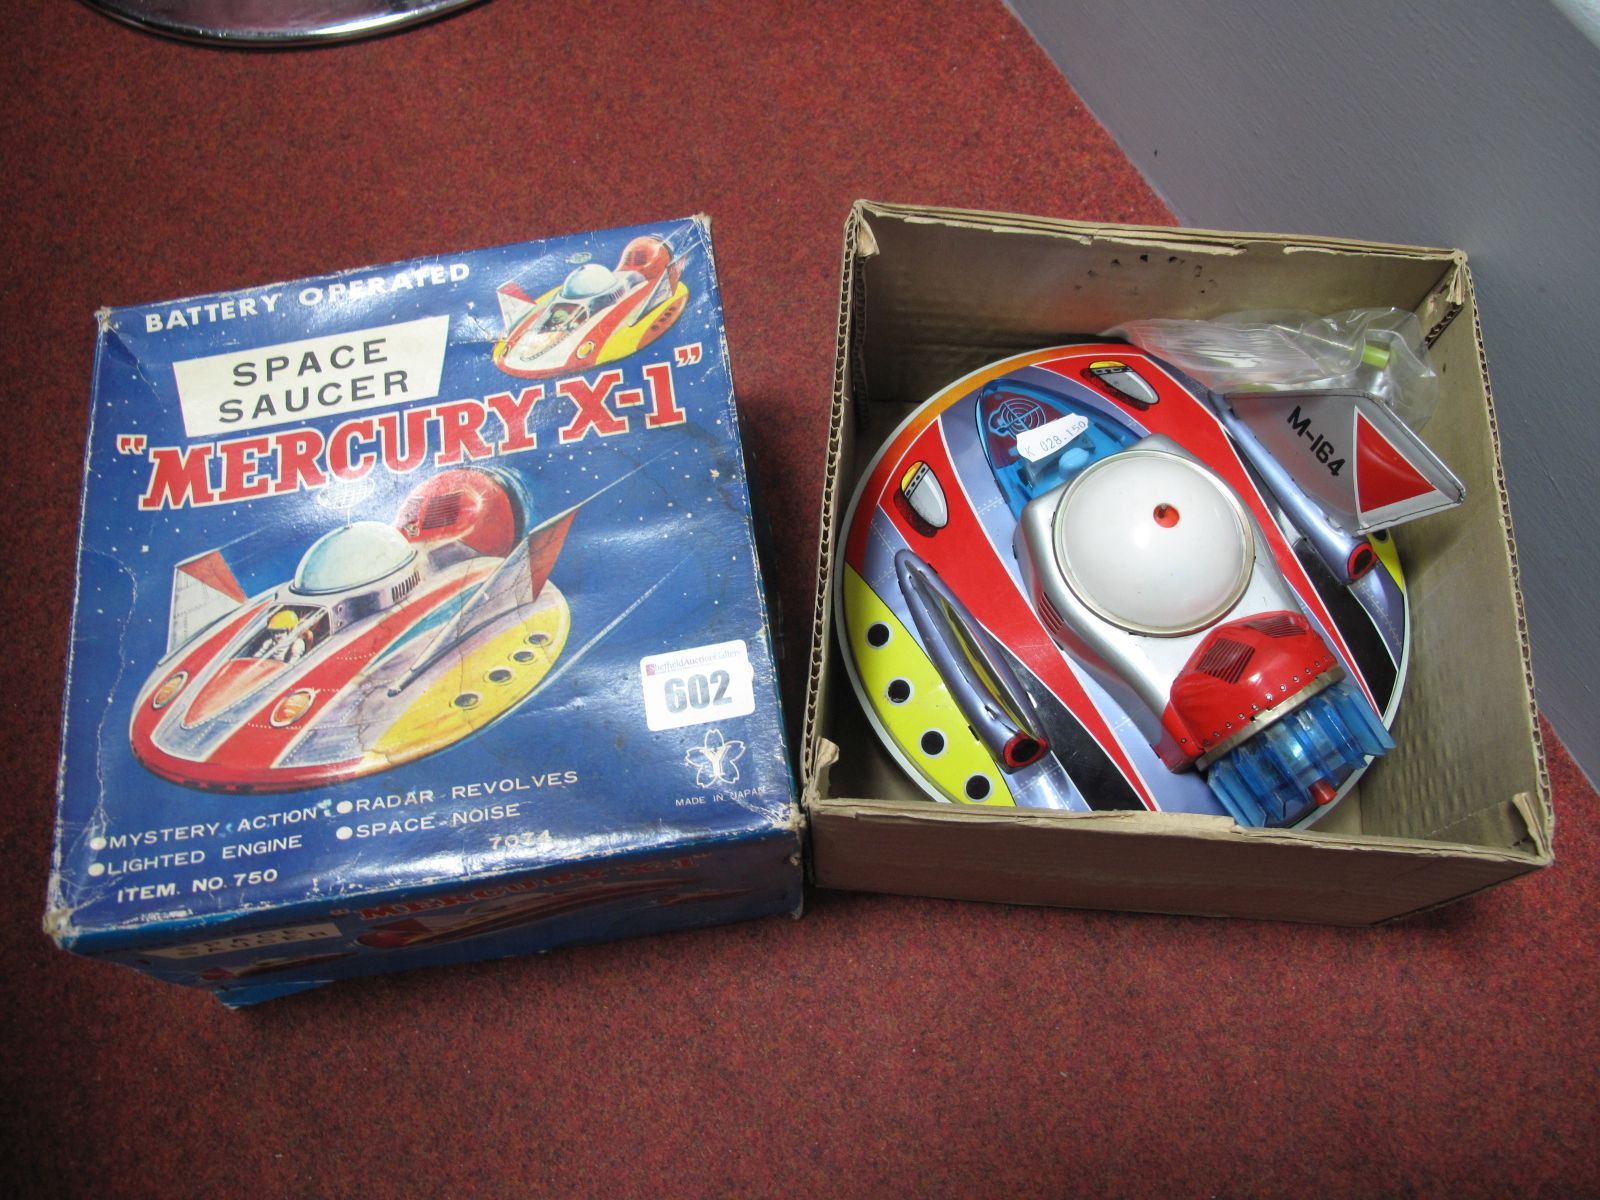 A 1970 Tinplate and Plastic "Mercury X-I" Space Ship By Yonanaza of Japan, battery operated,